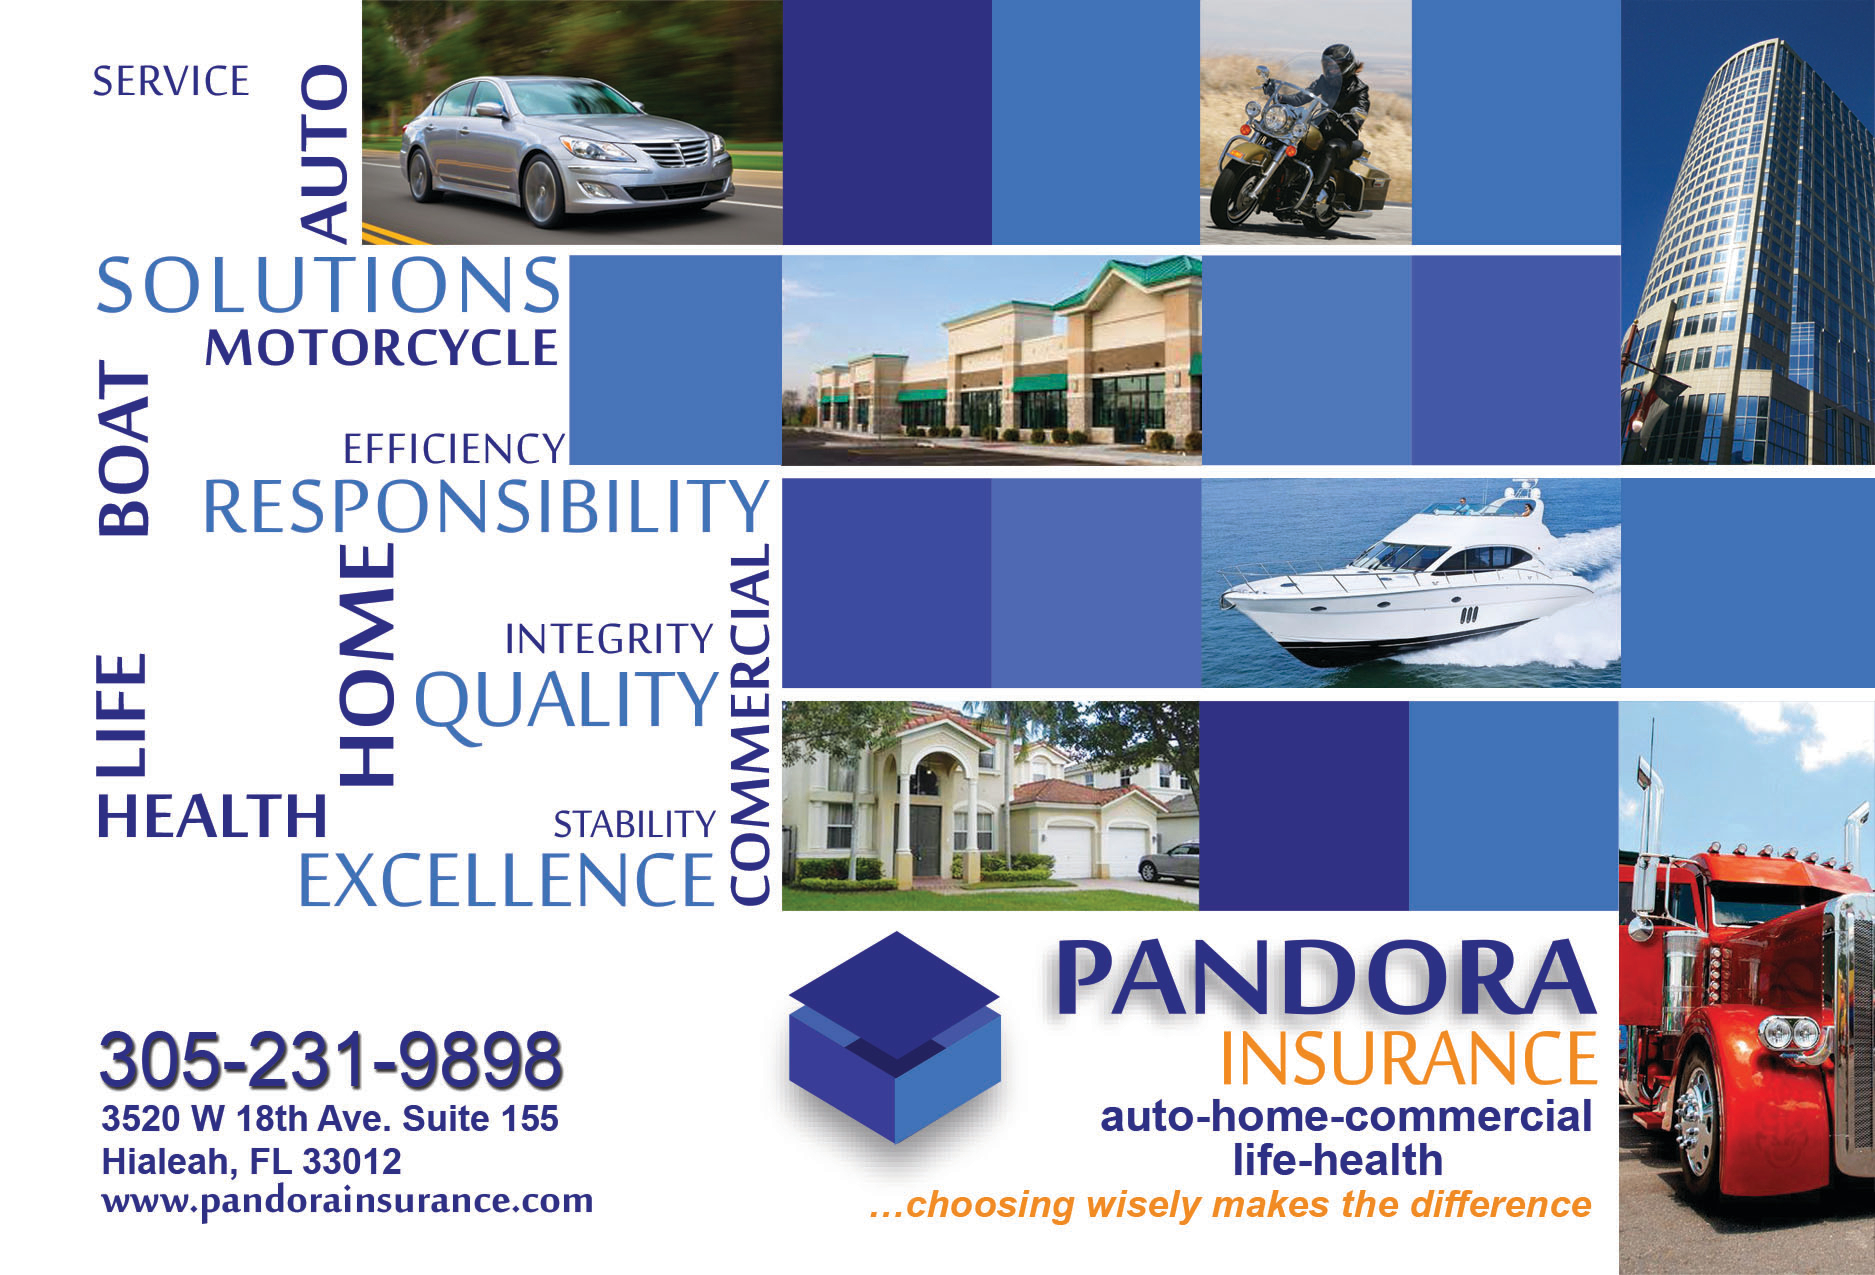 Pandora Insurance best coverage at the best price!